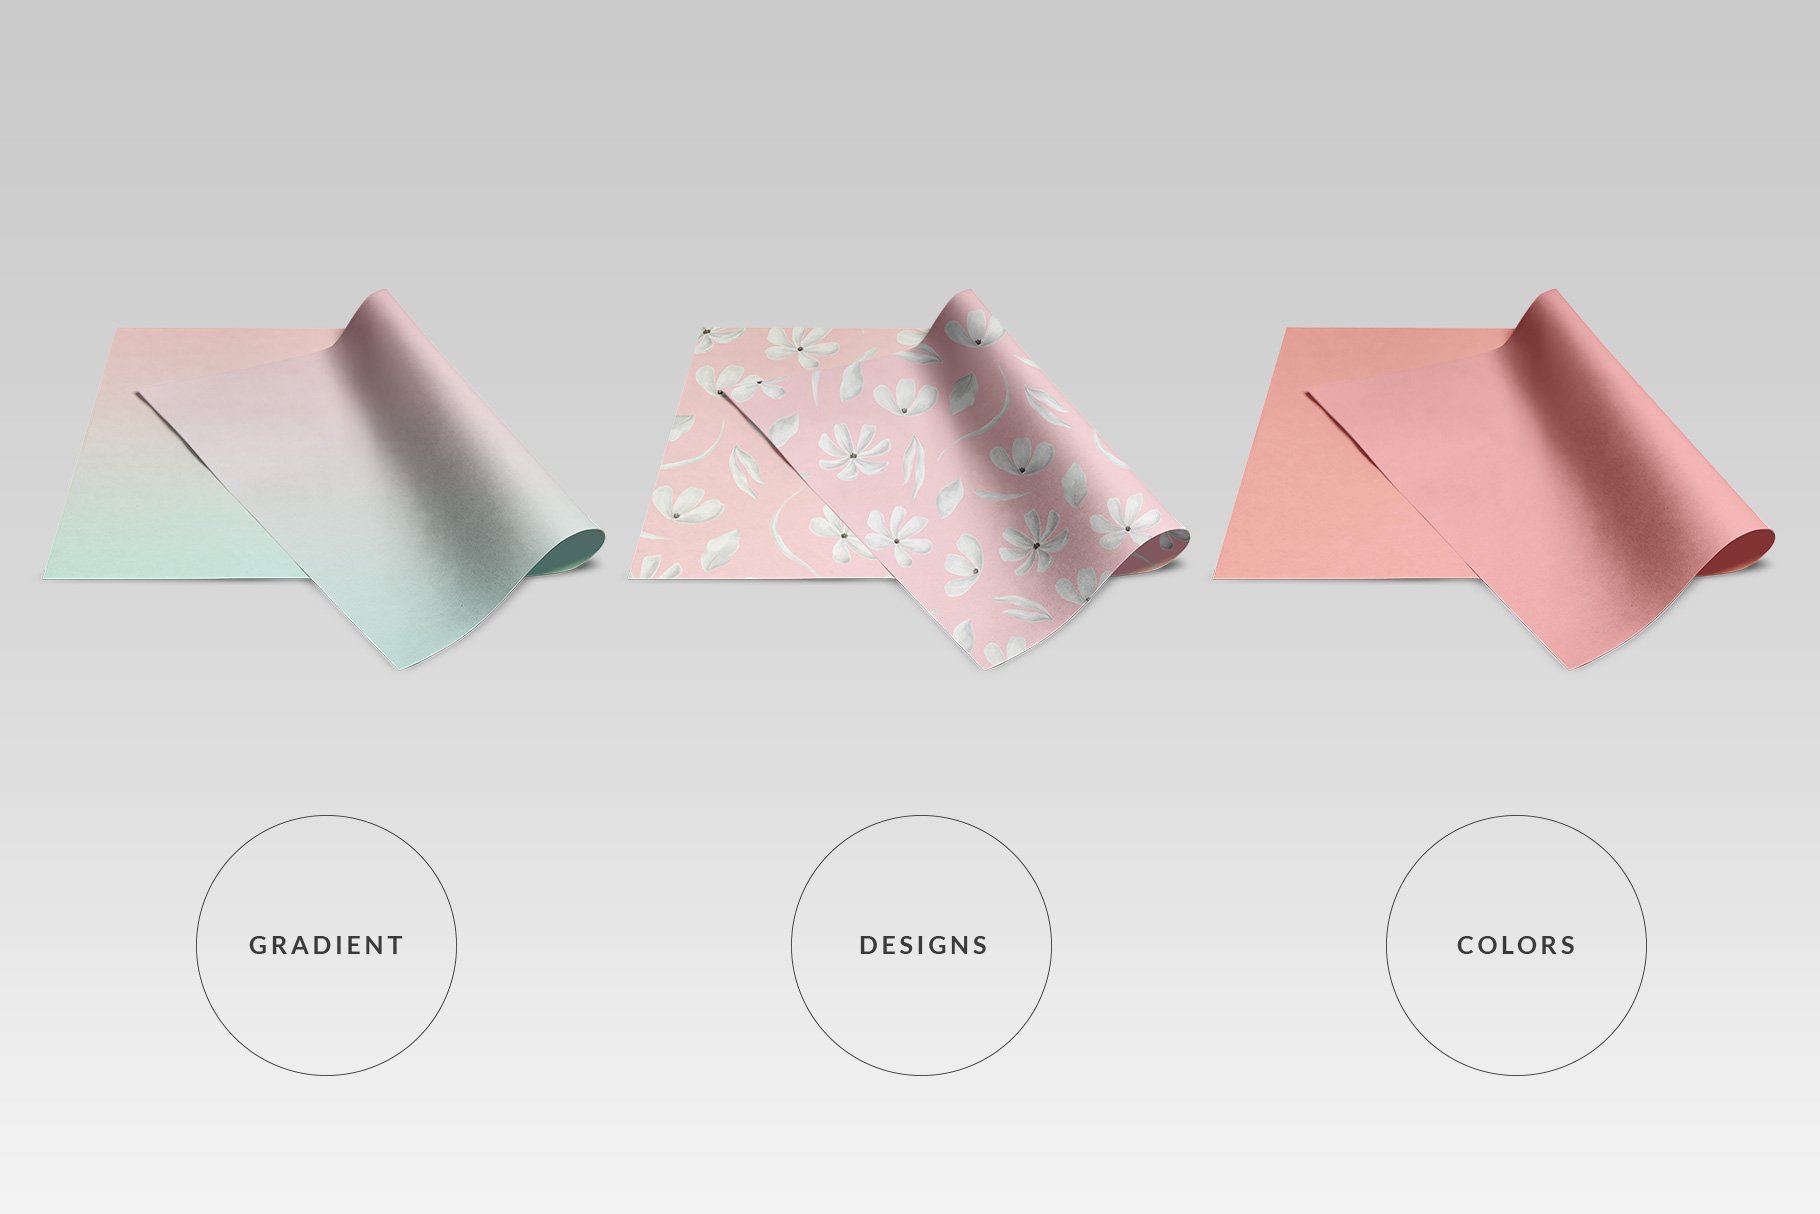 Top View Wrapping Paper Roll Mockup